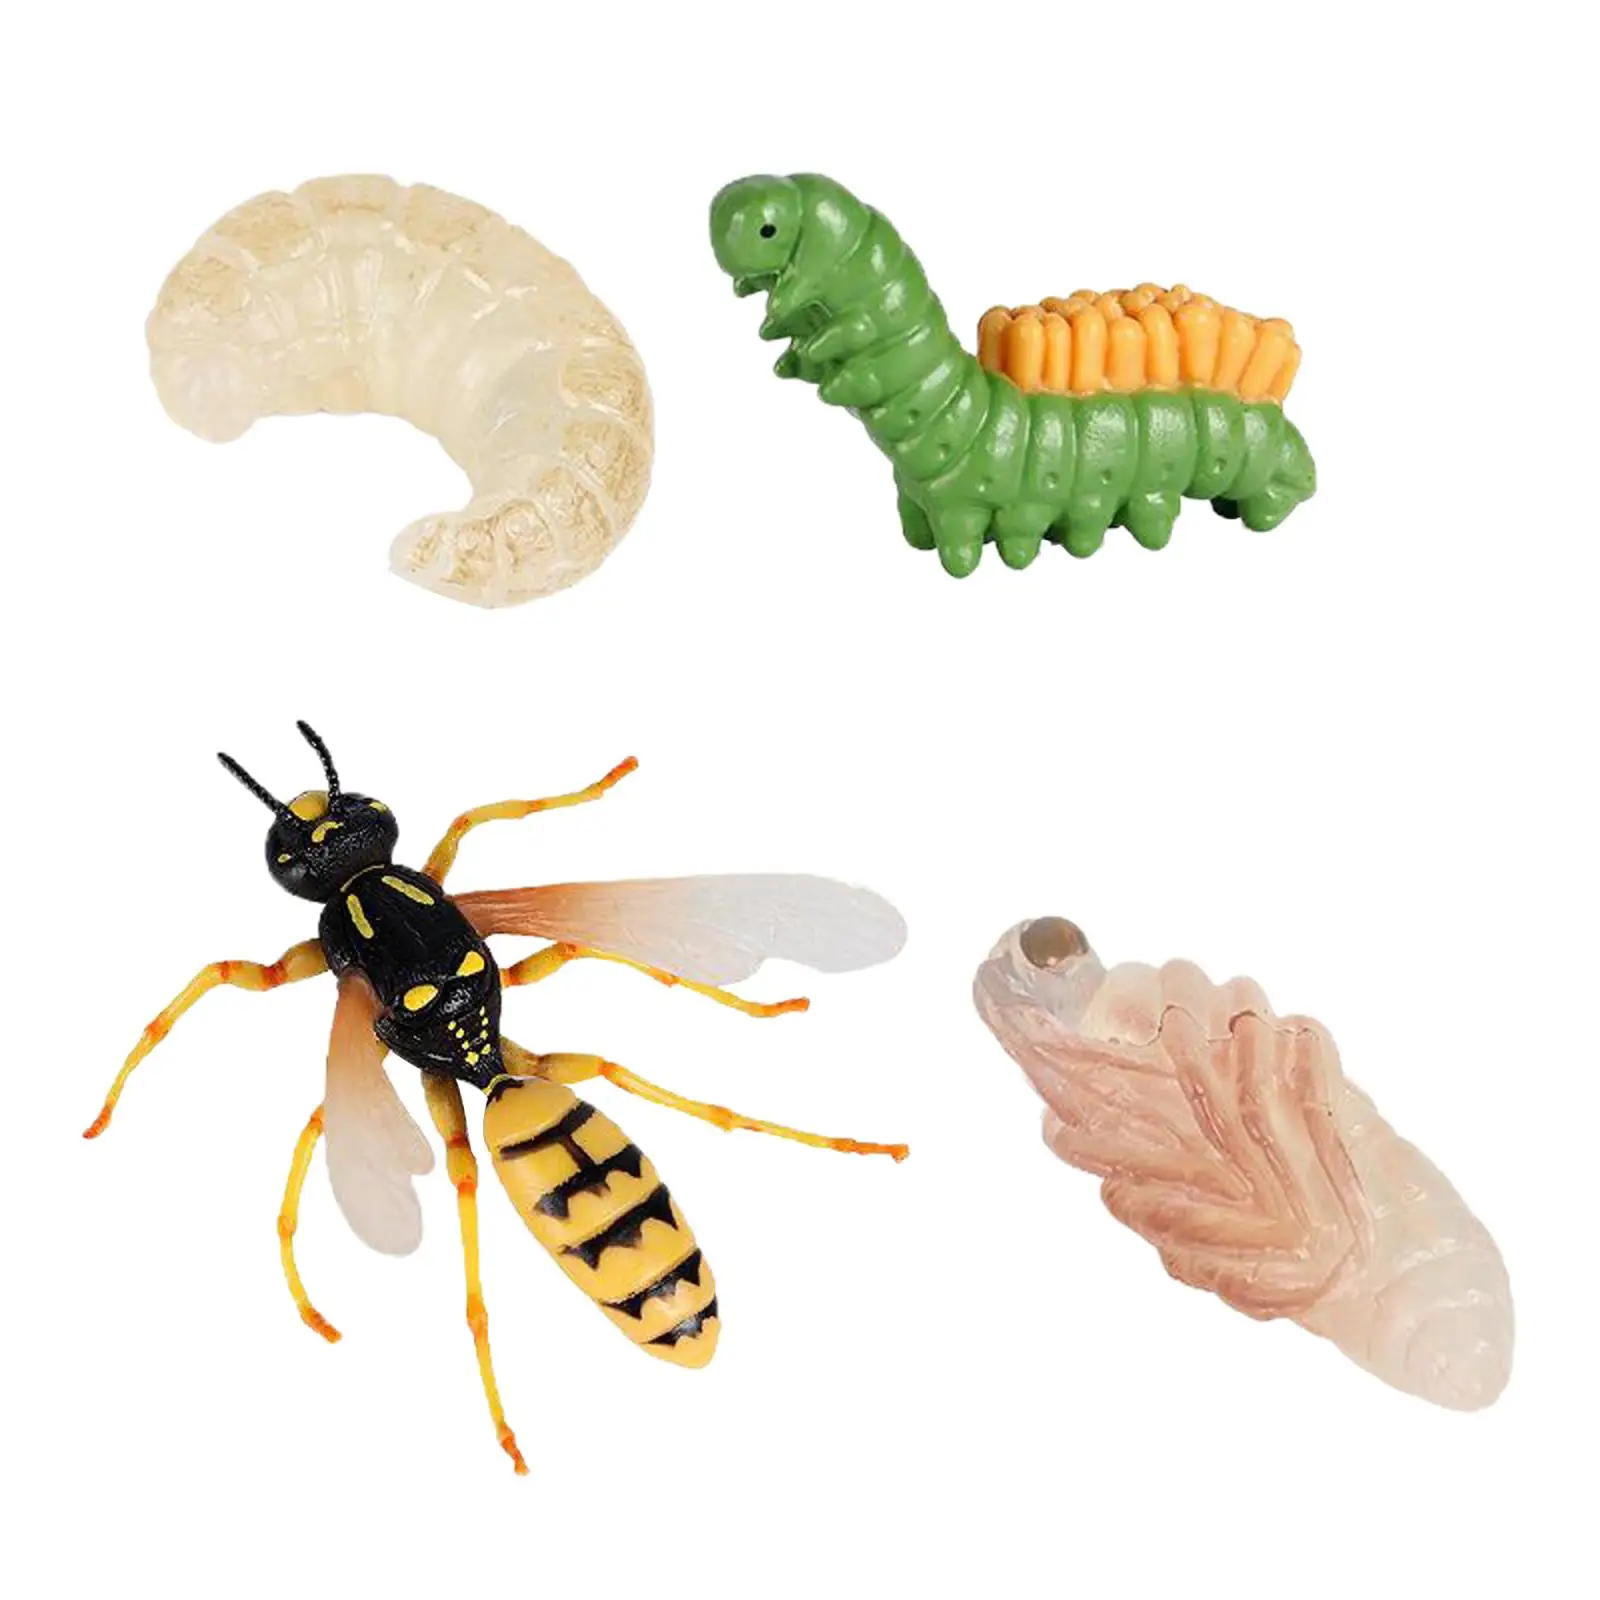 Lifelike Wasp Growth Life Cycle Insect Model Child Early Teaching Aids Toy